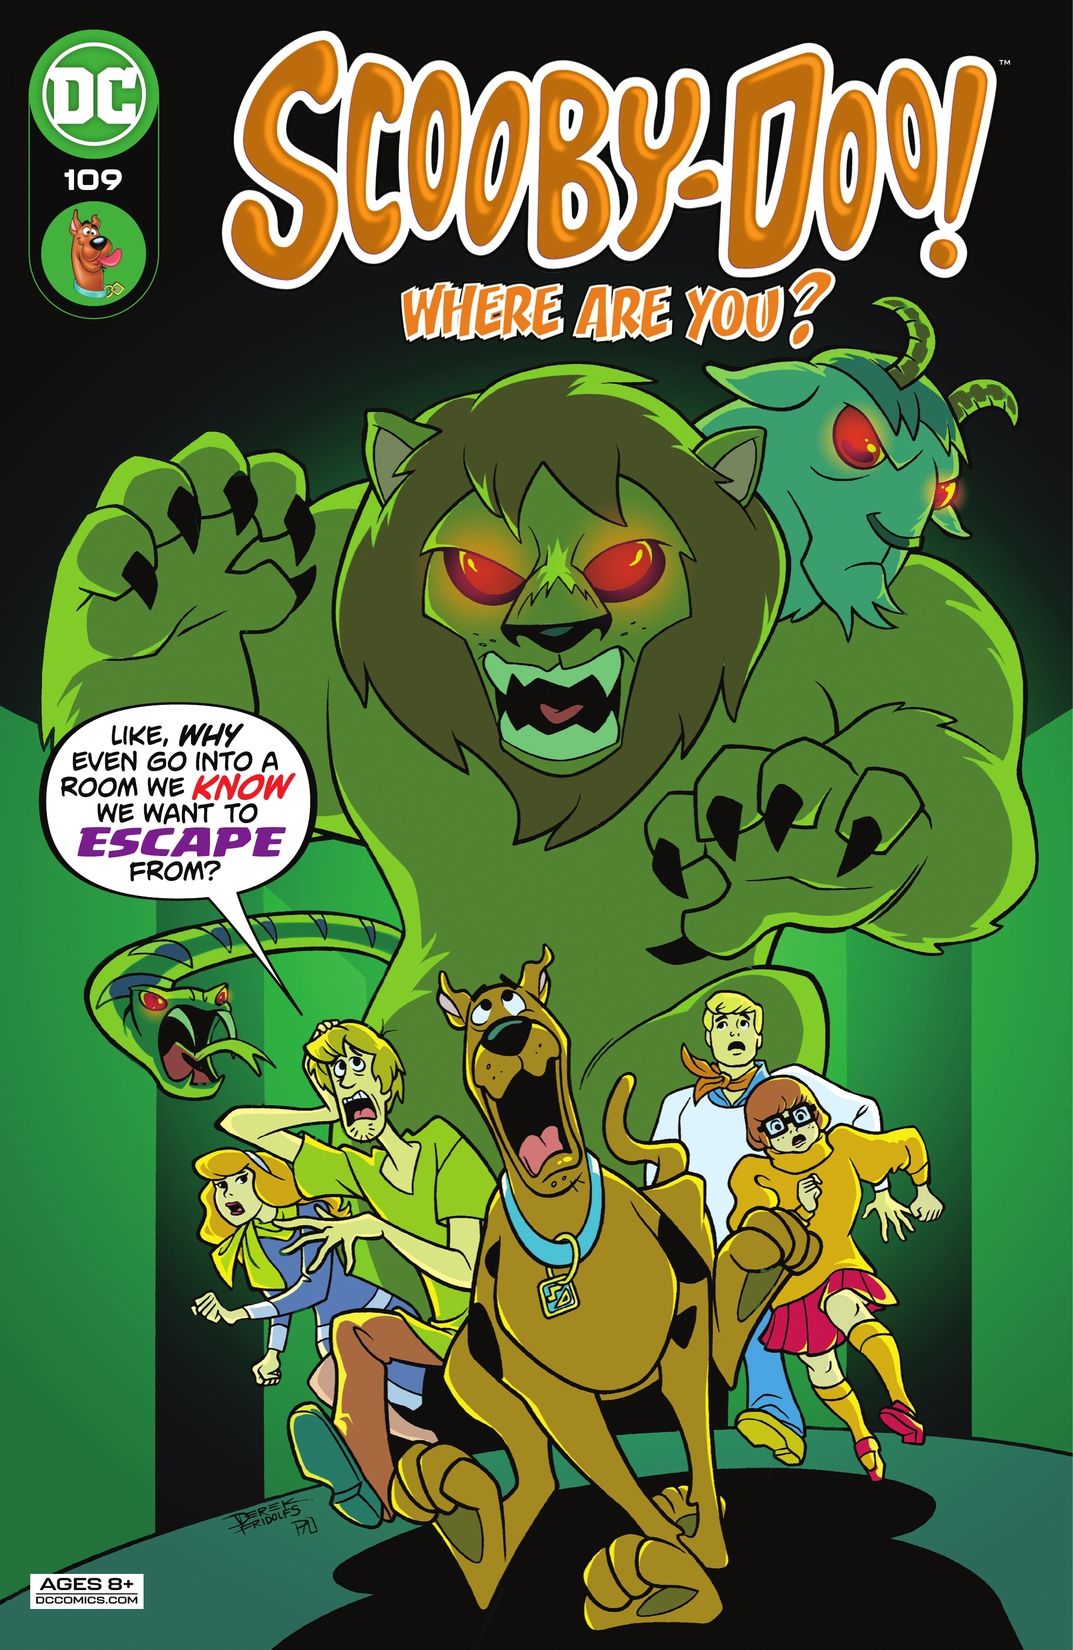 Scooby-Doo, Where Are You? #109 preview images